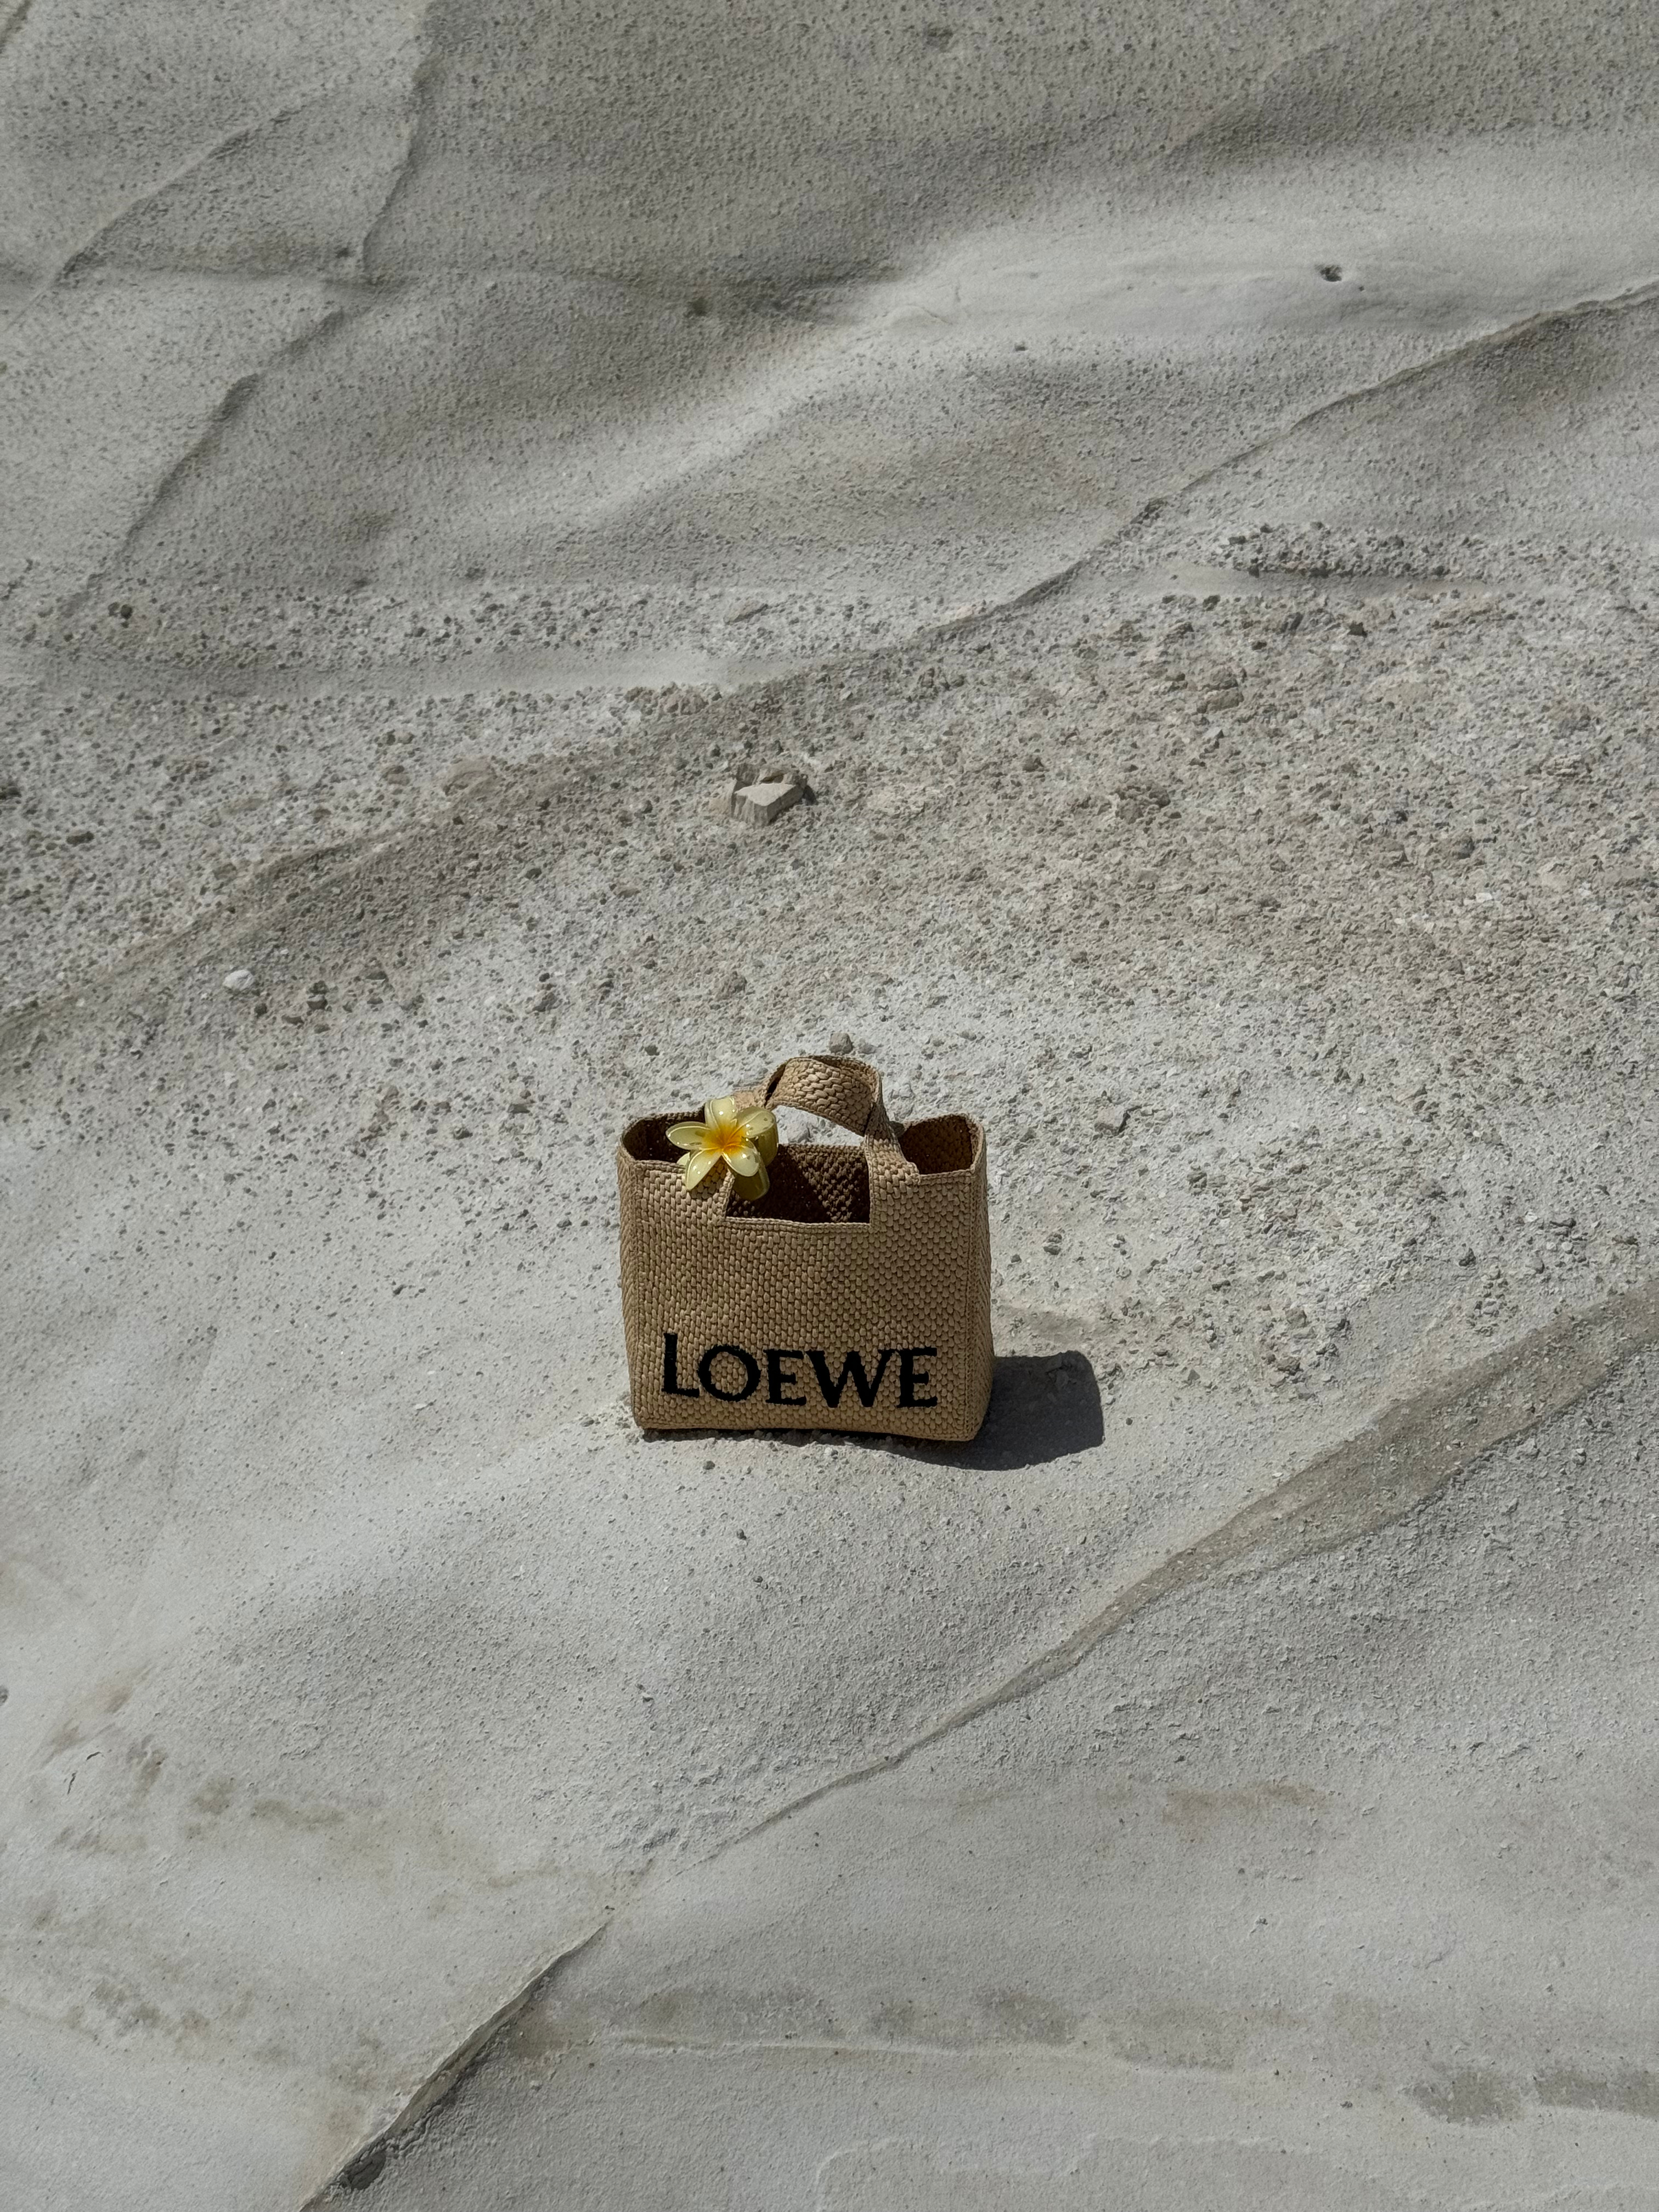 A small bag rests gently in the soft sand of the resort, ready for a day of seaside adventure and relaxation.